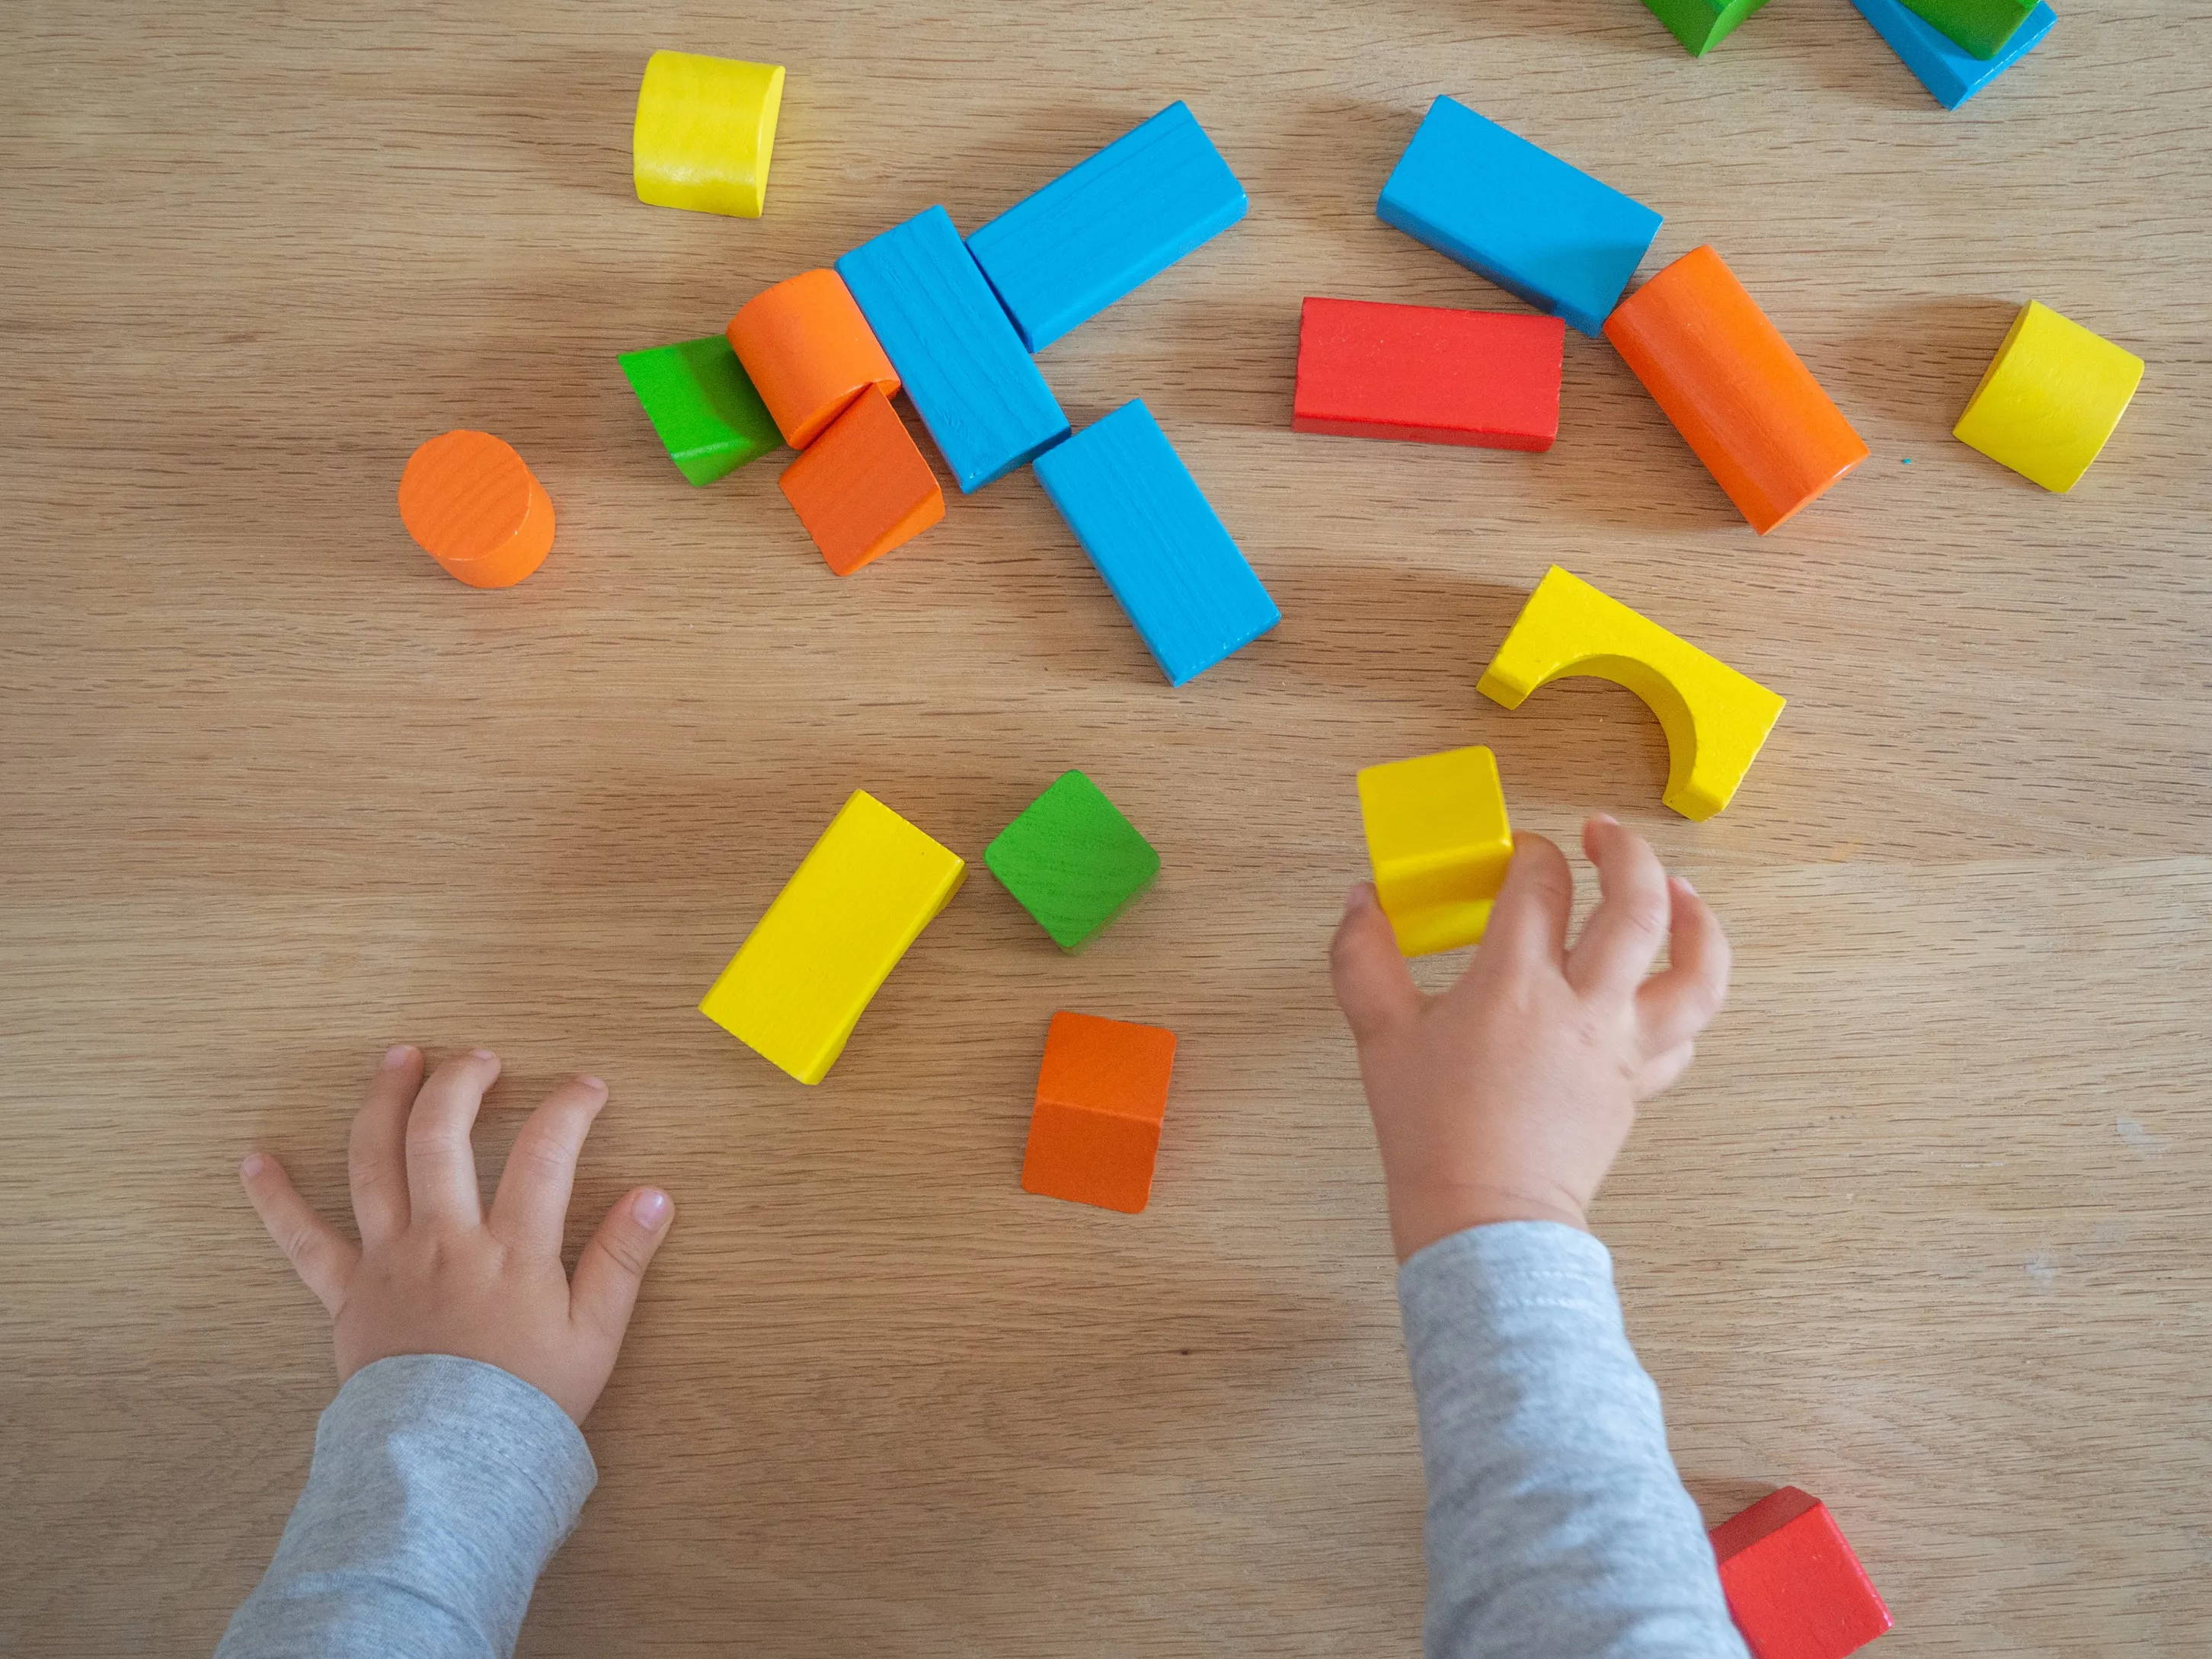 A child's hands playing with colorful wooden blocks